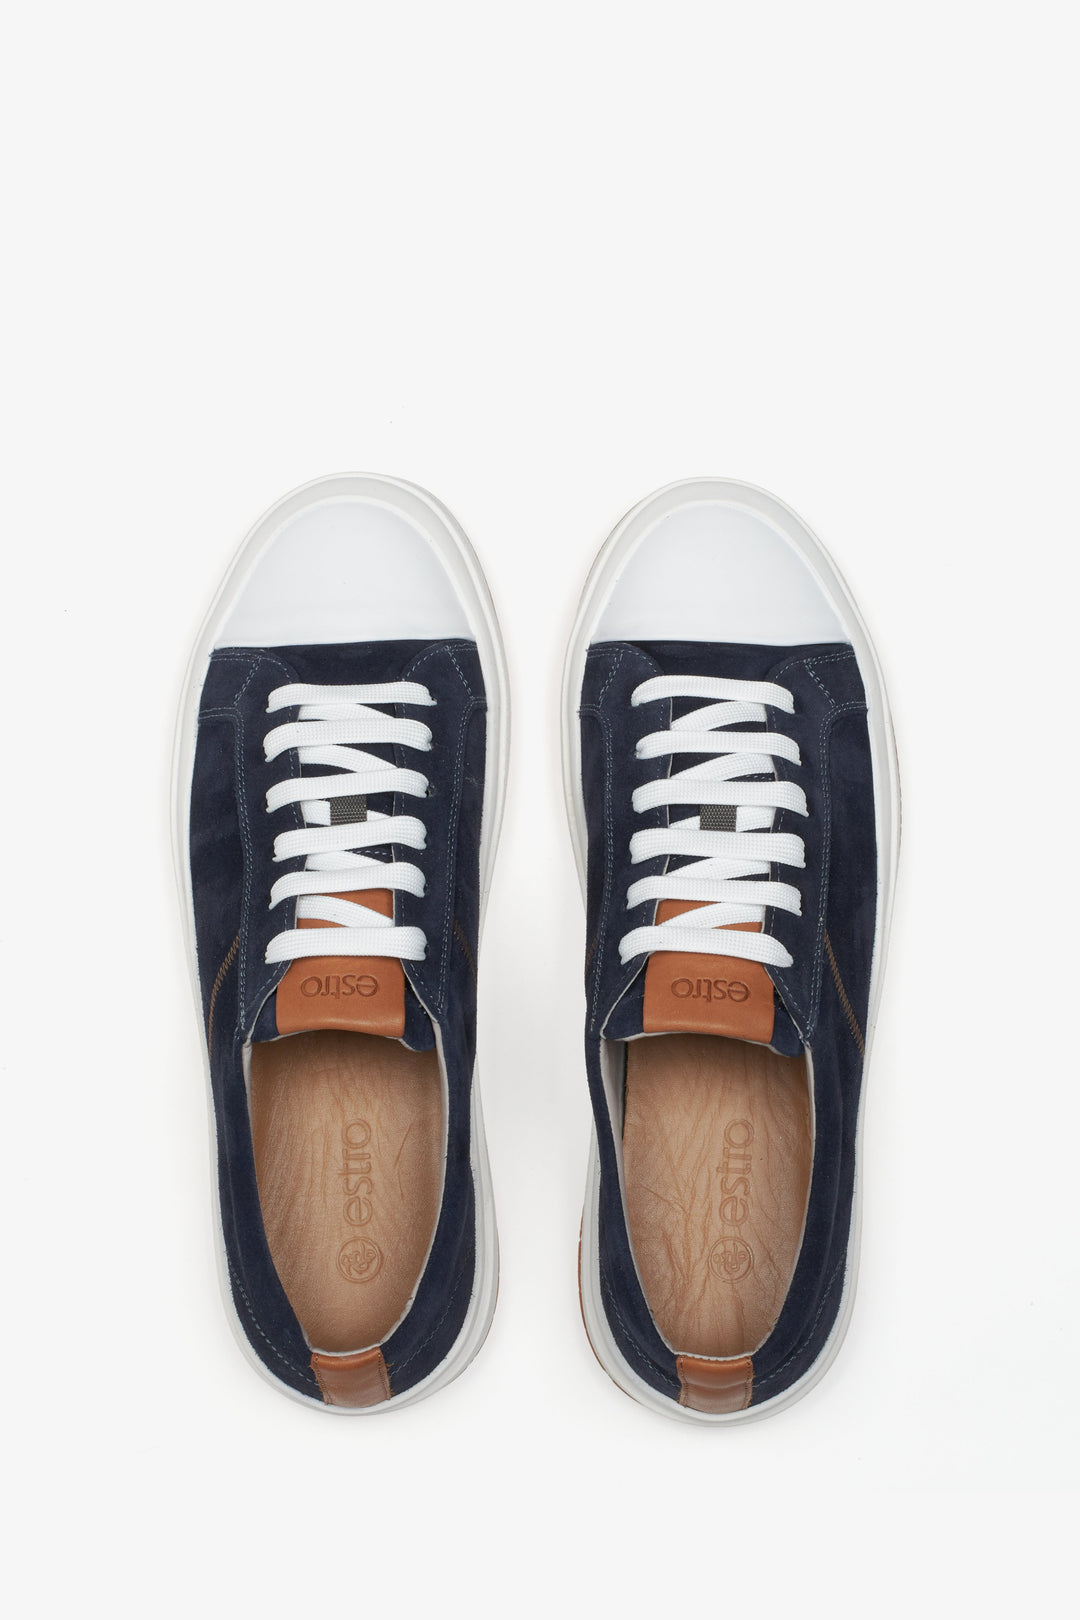 Navy blue men's sneakers made of genuine velour - top view presentation of the model.